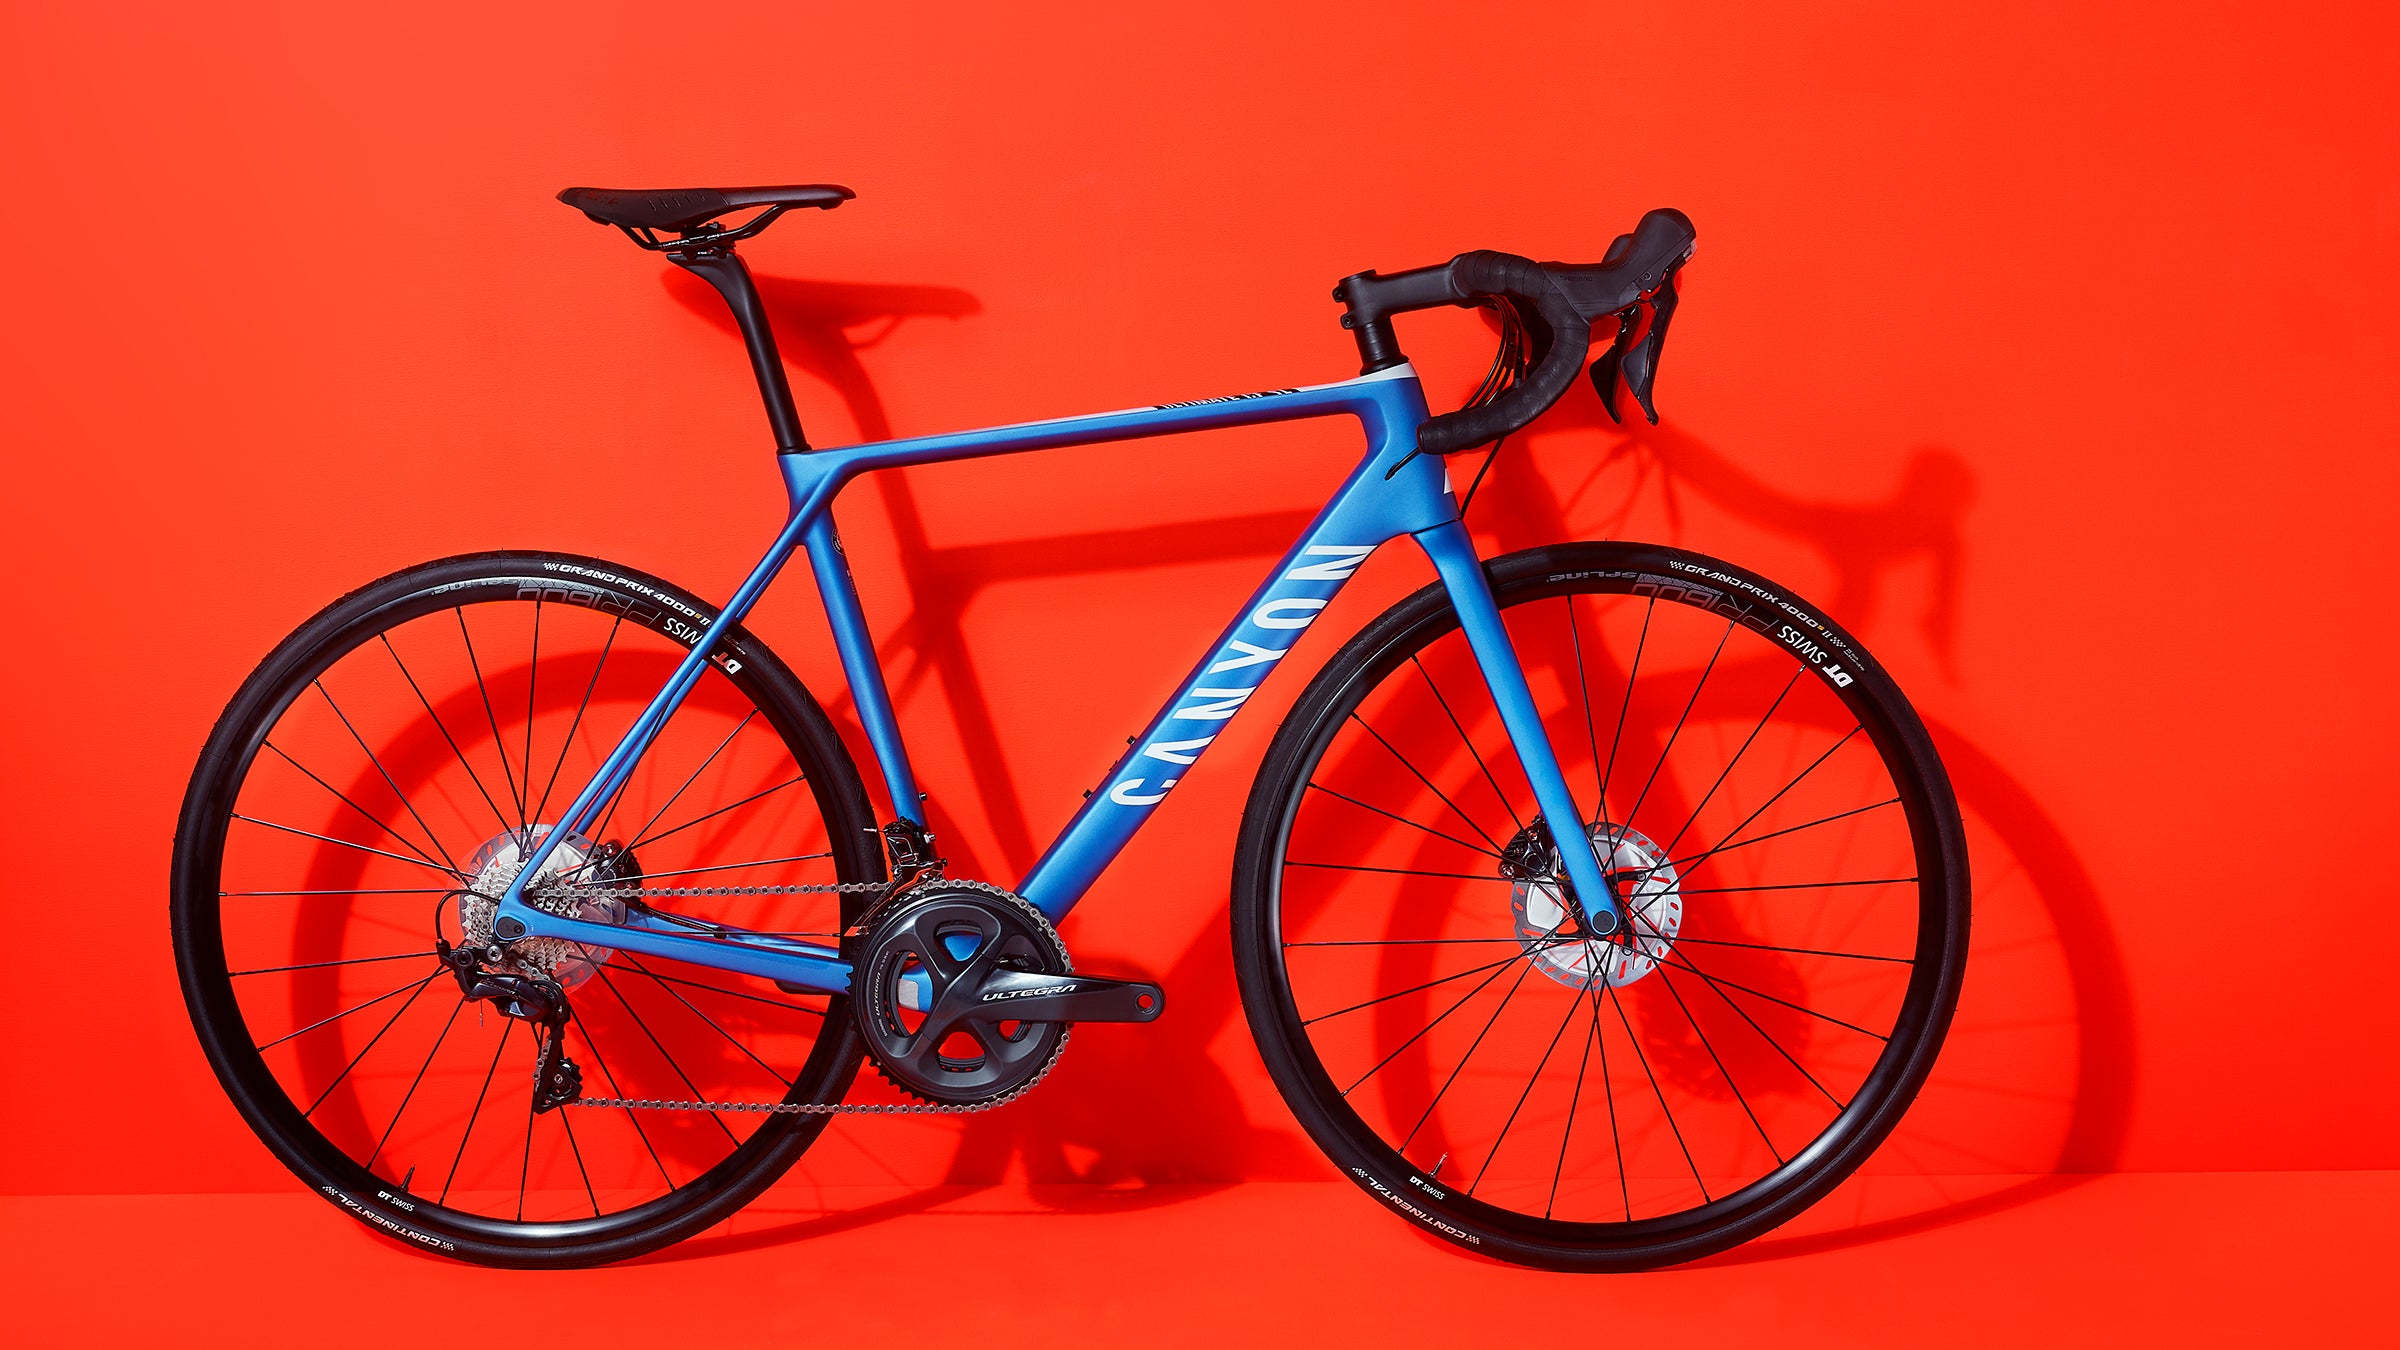 The Best Road Bikes of 2018